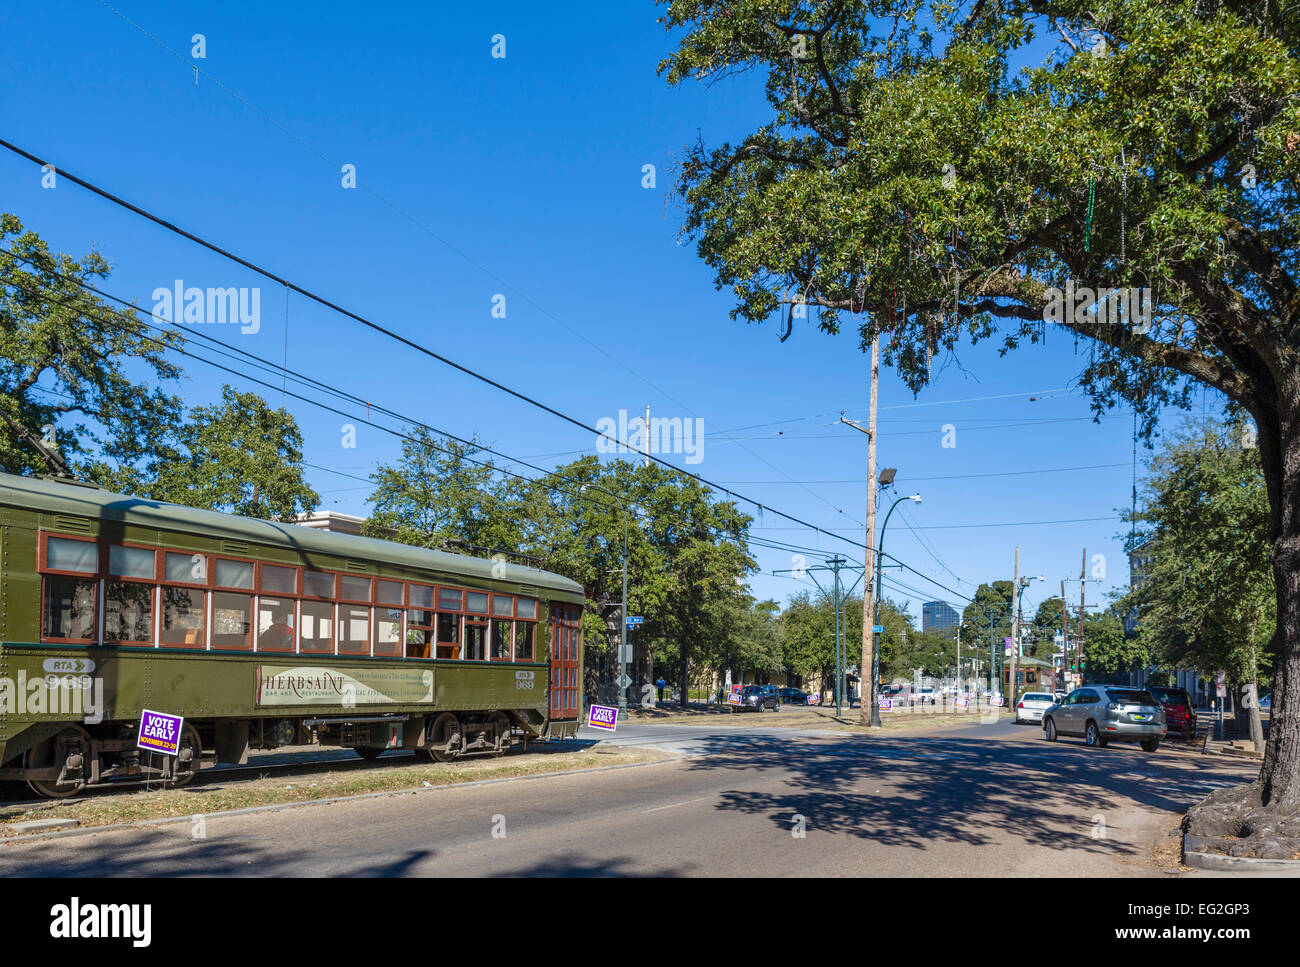 St Charles Streetcar on St Charles Avenue in the Garden District, New Orleans, Louisiana, USA Stock Photo